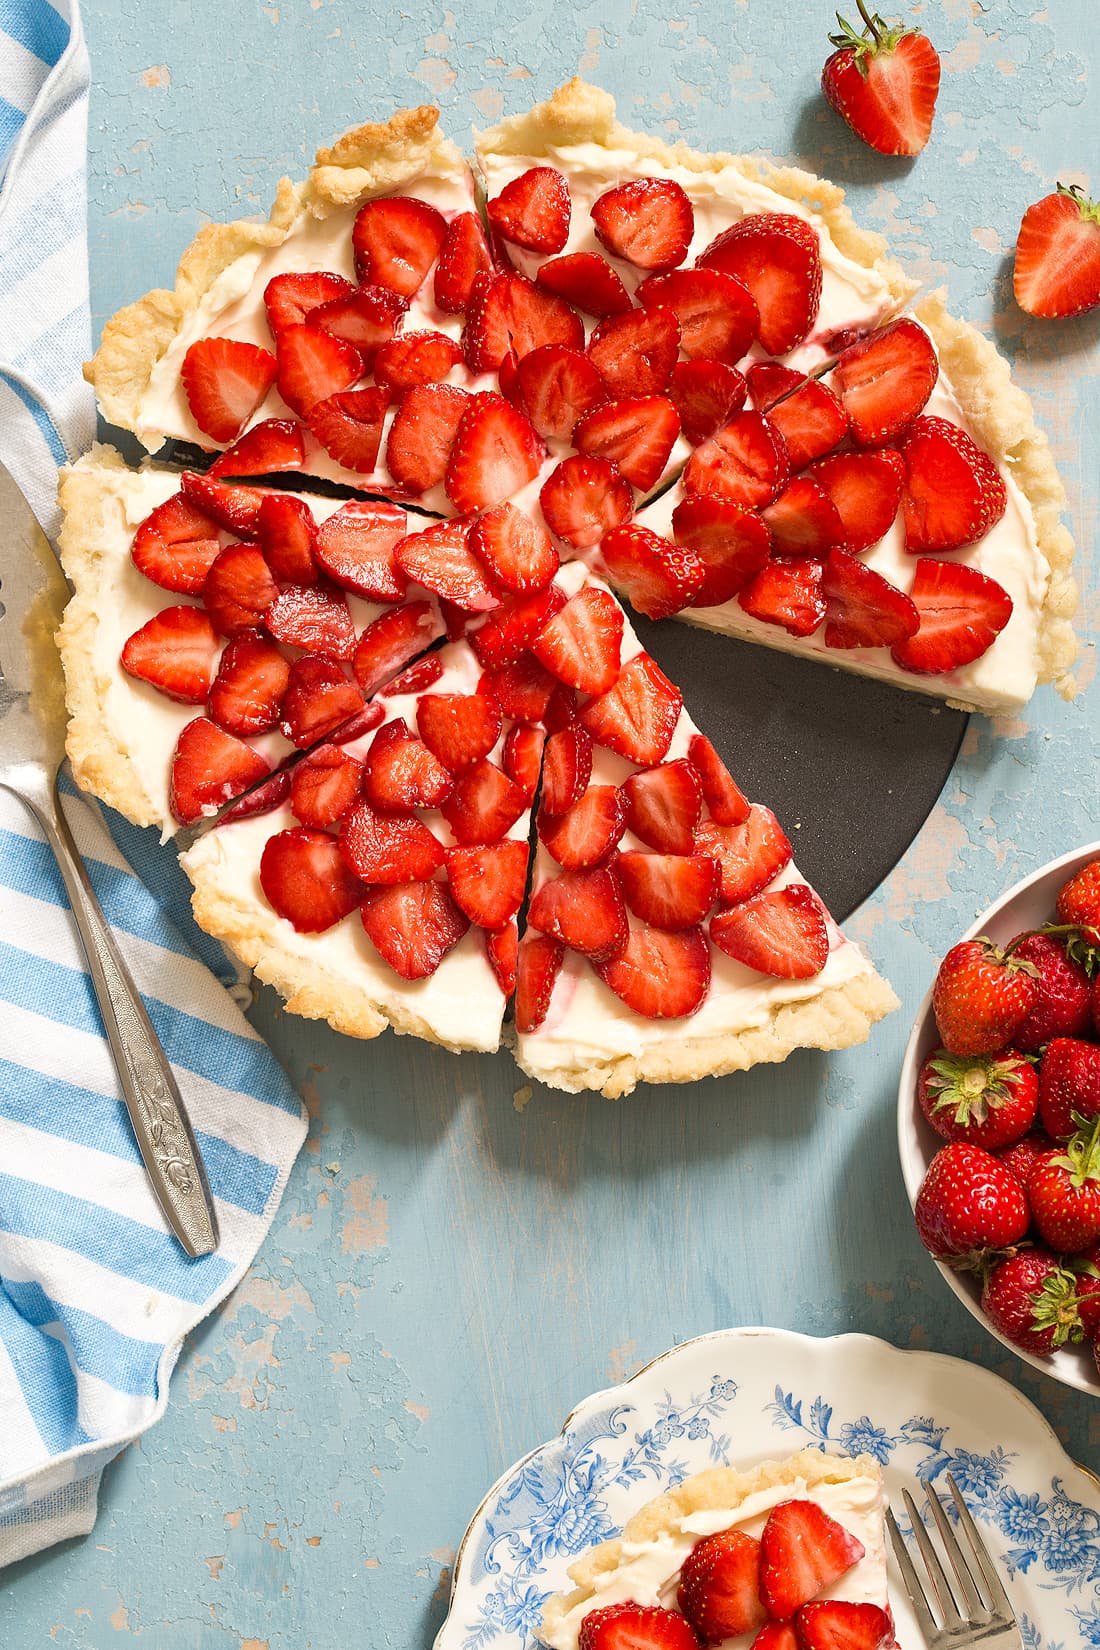 Strawberry Cream Cheese Tart with a homemade pie crust is an easy summer tart that will impress. It's like eating a strawberry pie and cheesecake in one bite.